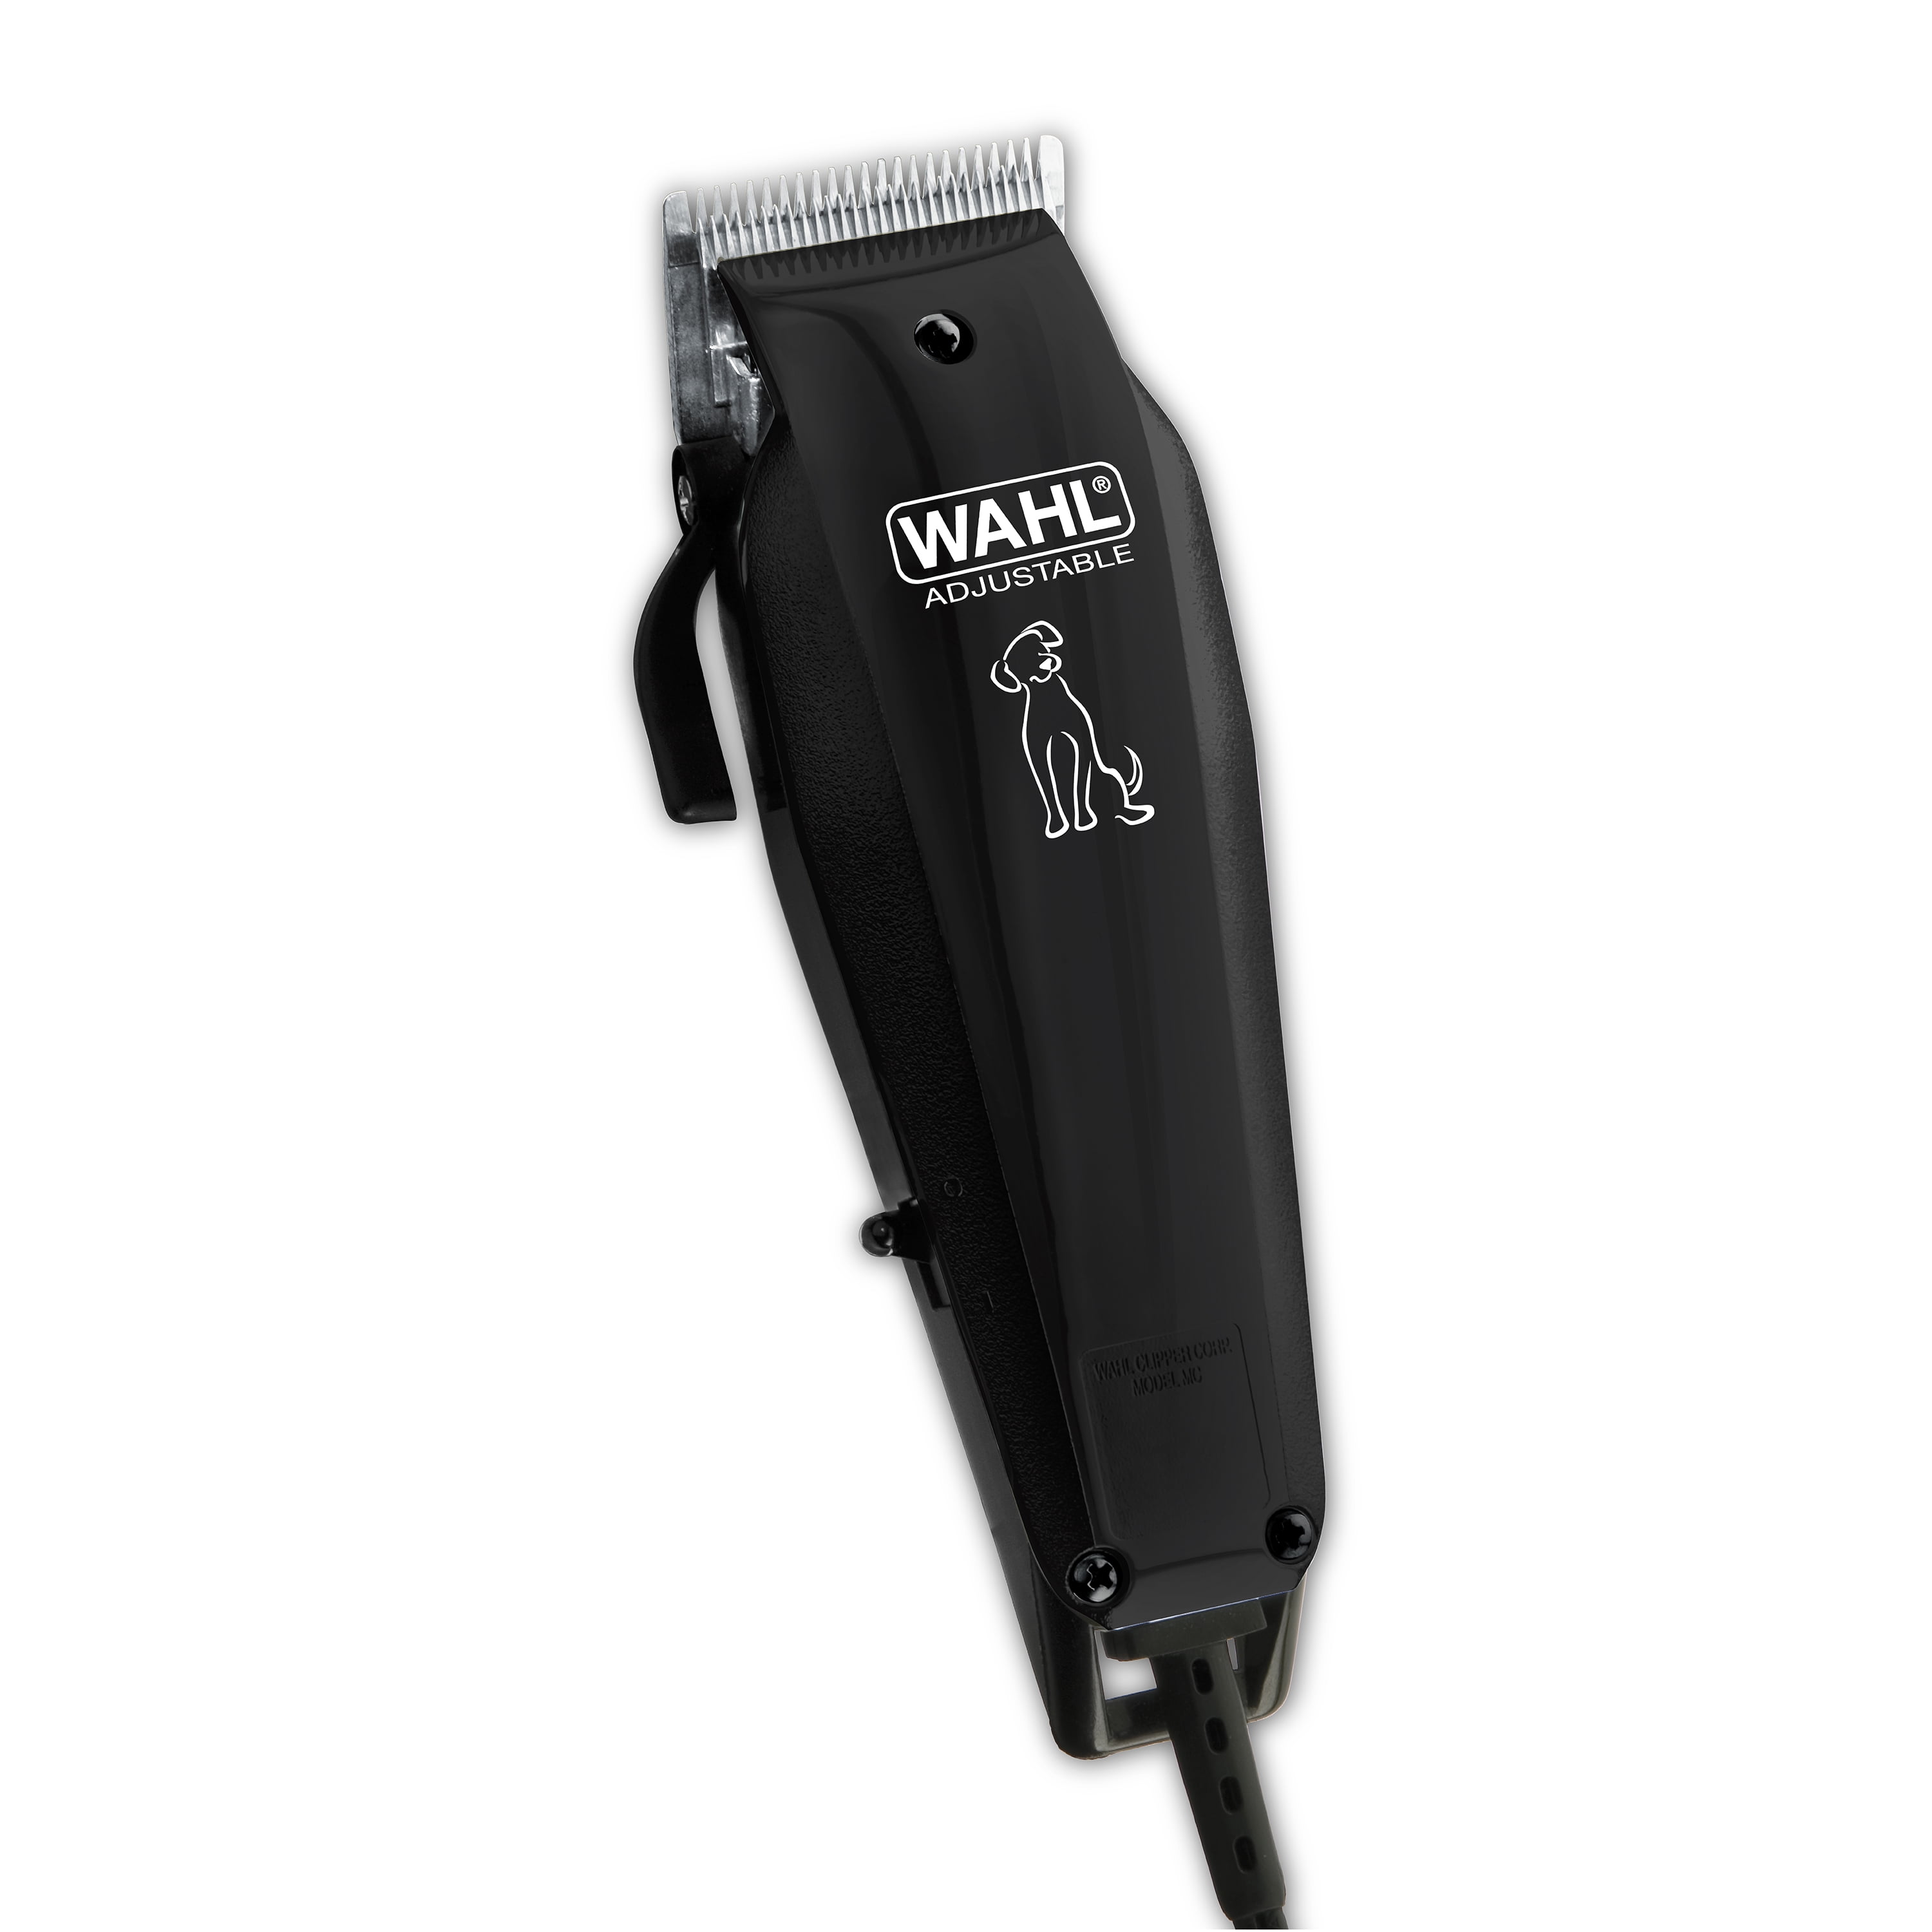 Wahl Basic Series Dog Clipper Kit - Corded Hair clipper for touch ups between Professional Grooming